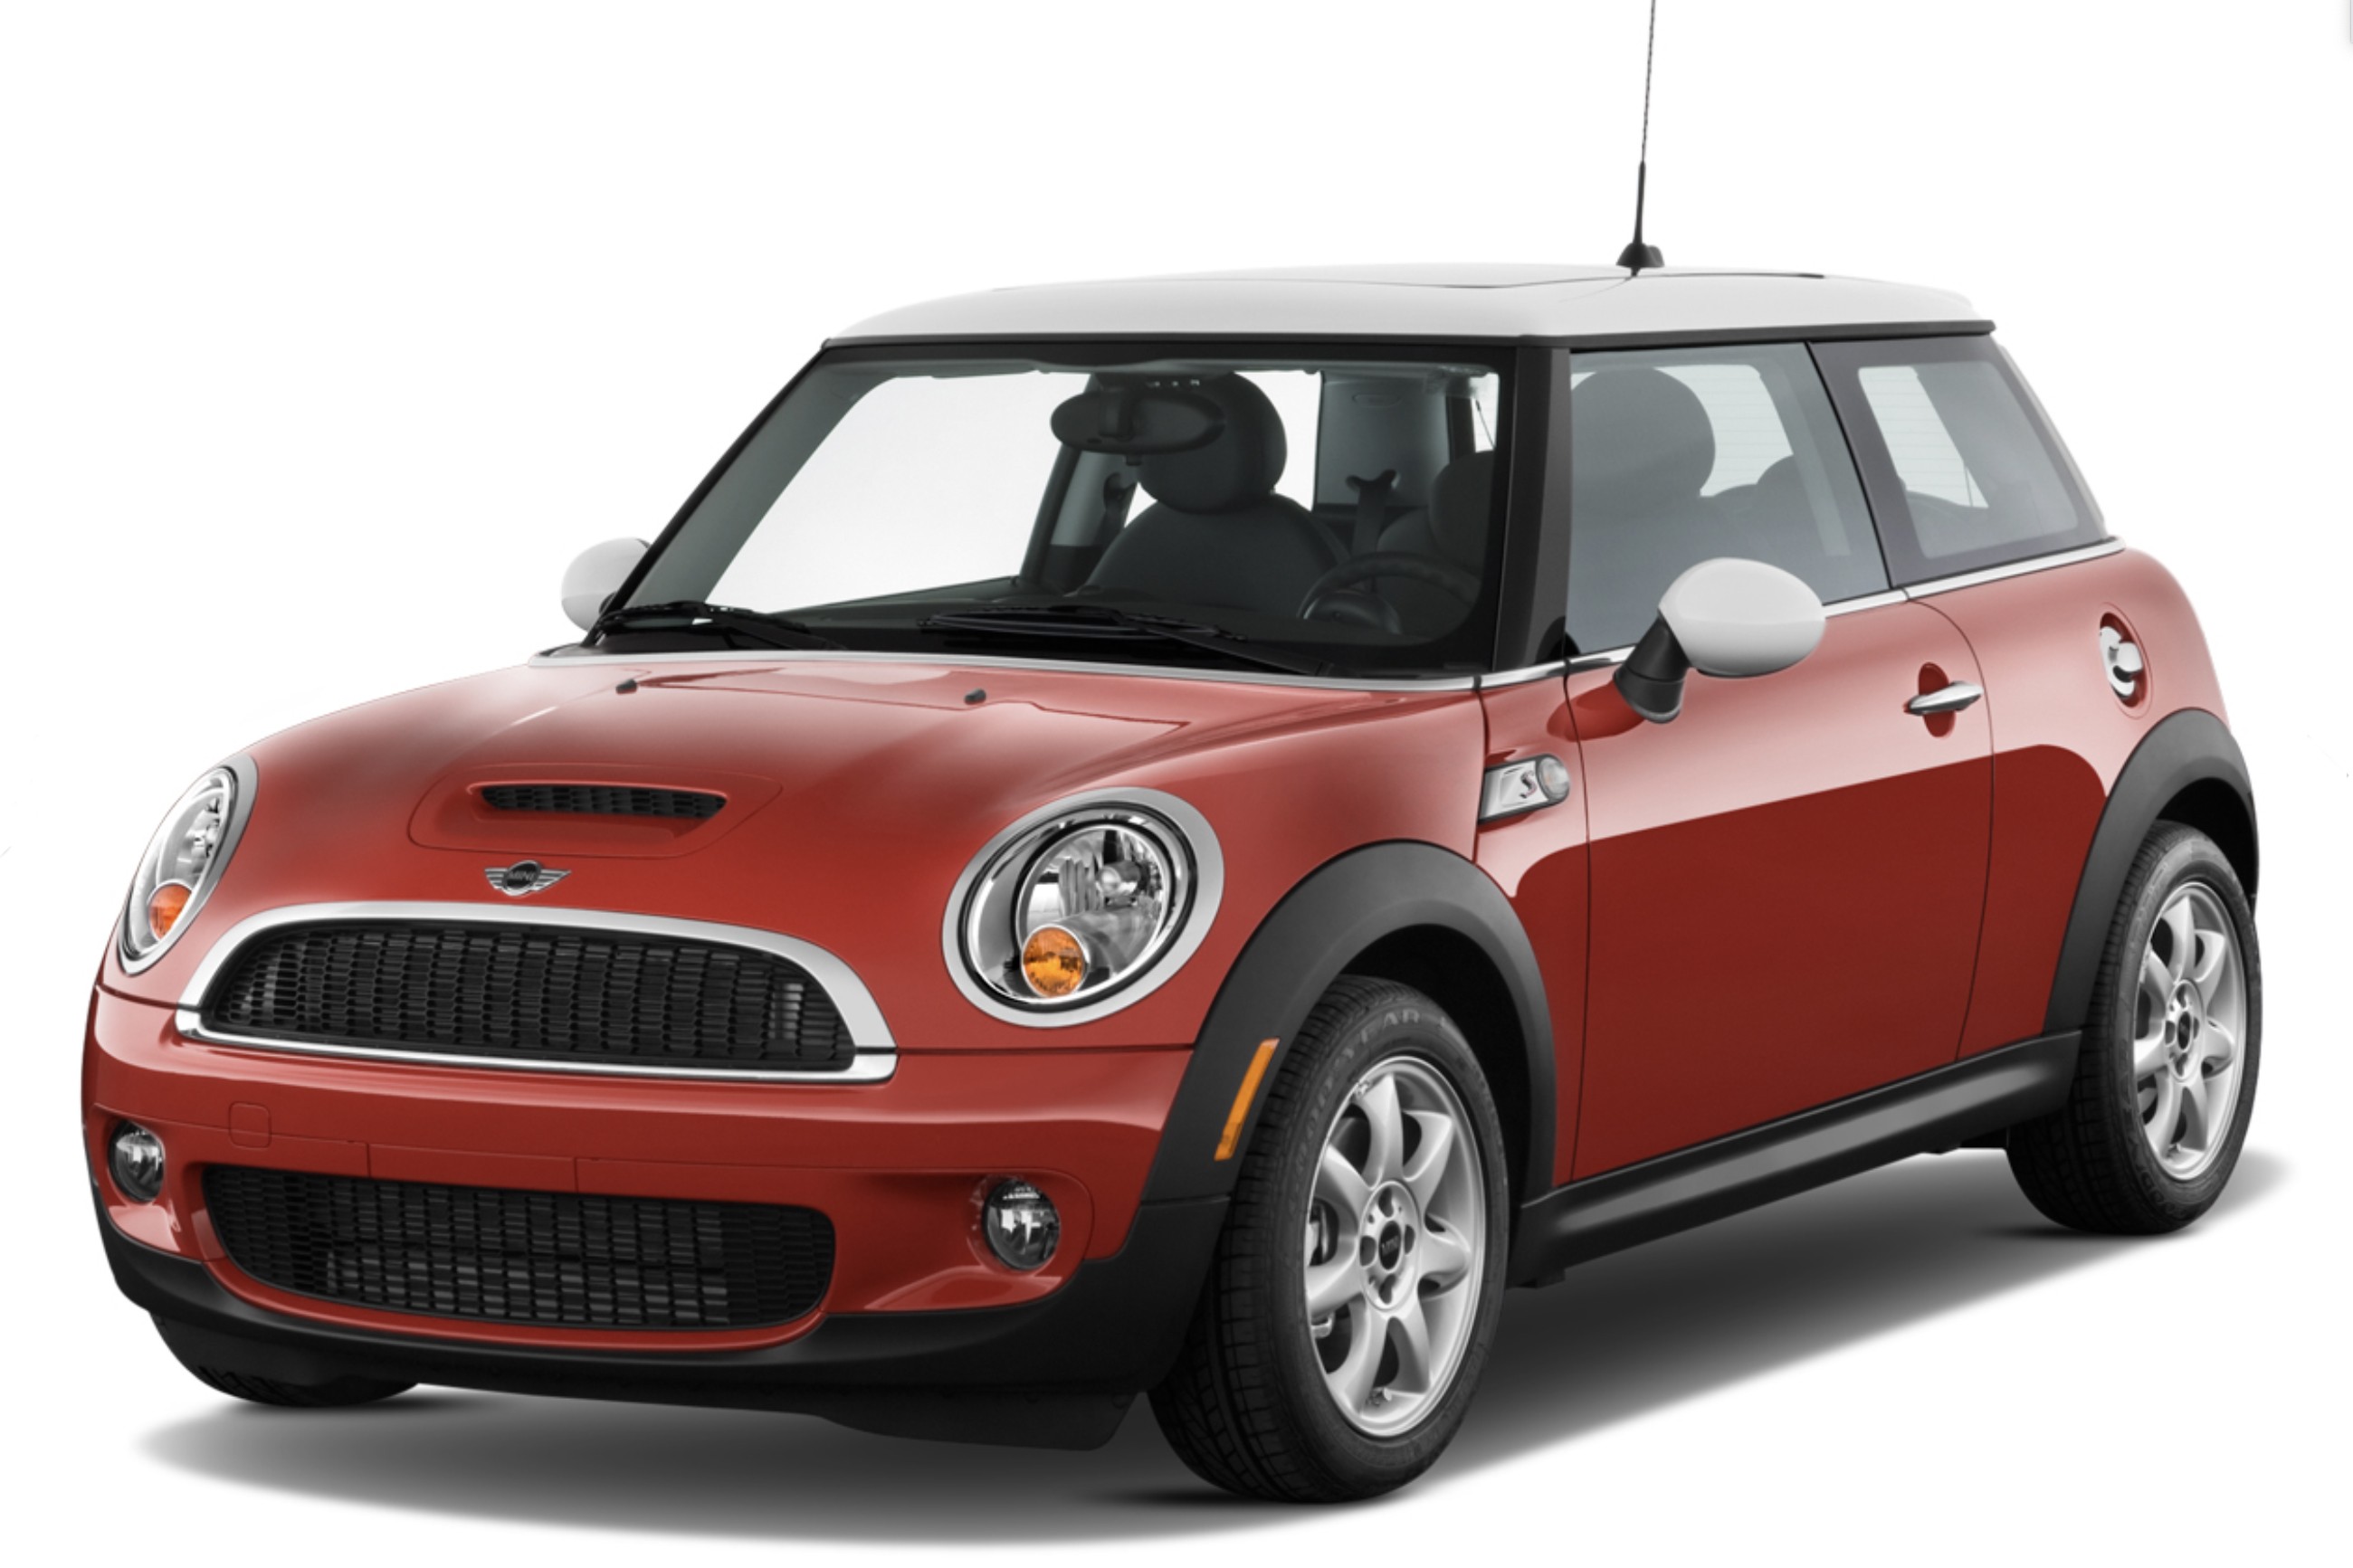 Mini Finds Fire Risk, Recalls 98,000 Cooper Hardtop and Clubman Models